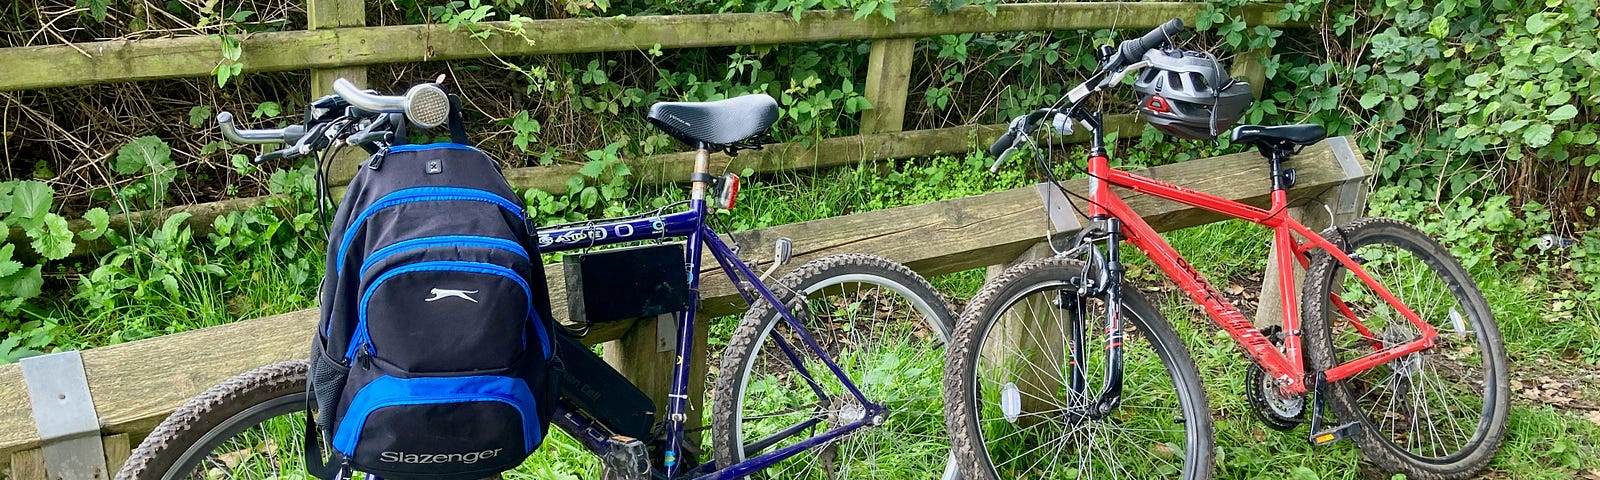 Two bikes leaning against a wooden fence in the countryside.